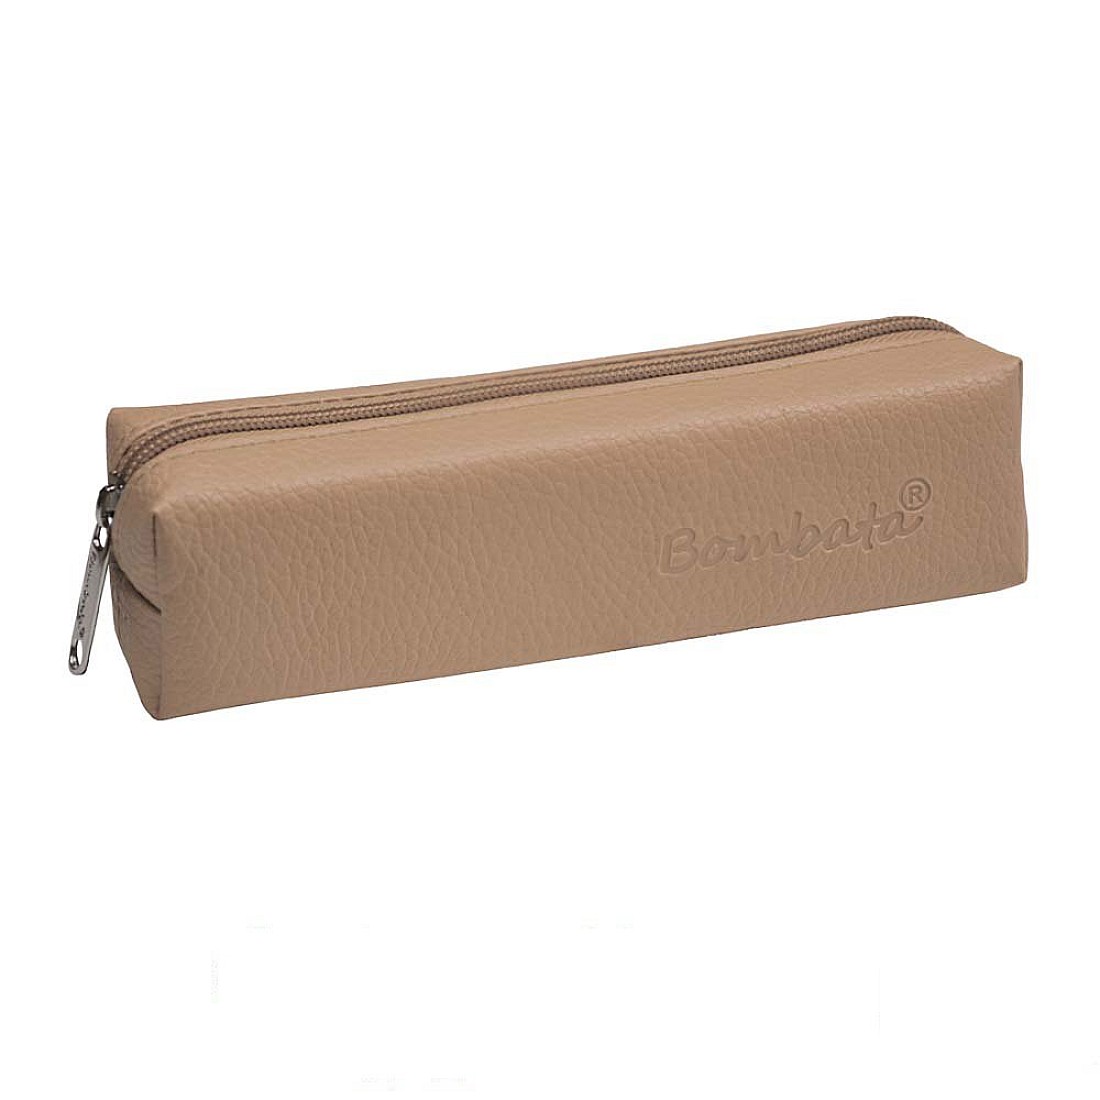 Bombata Classic Taupe Pen Pouch